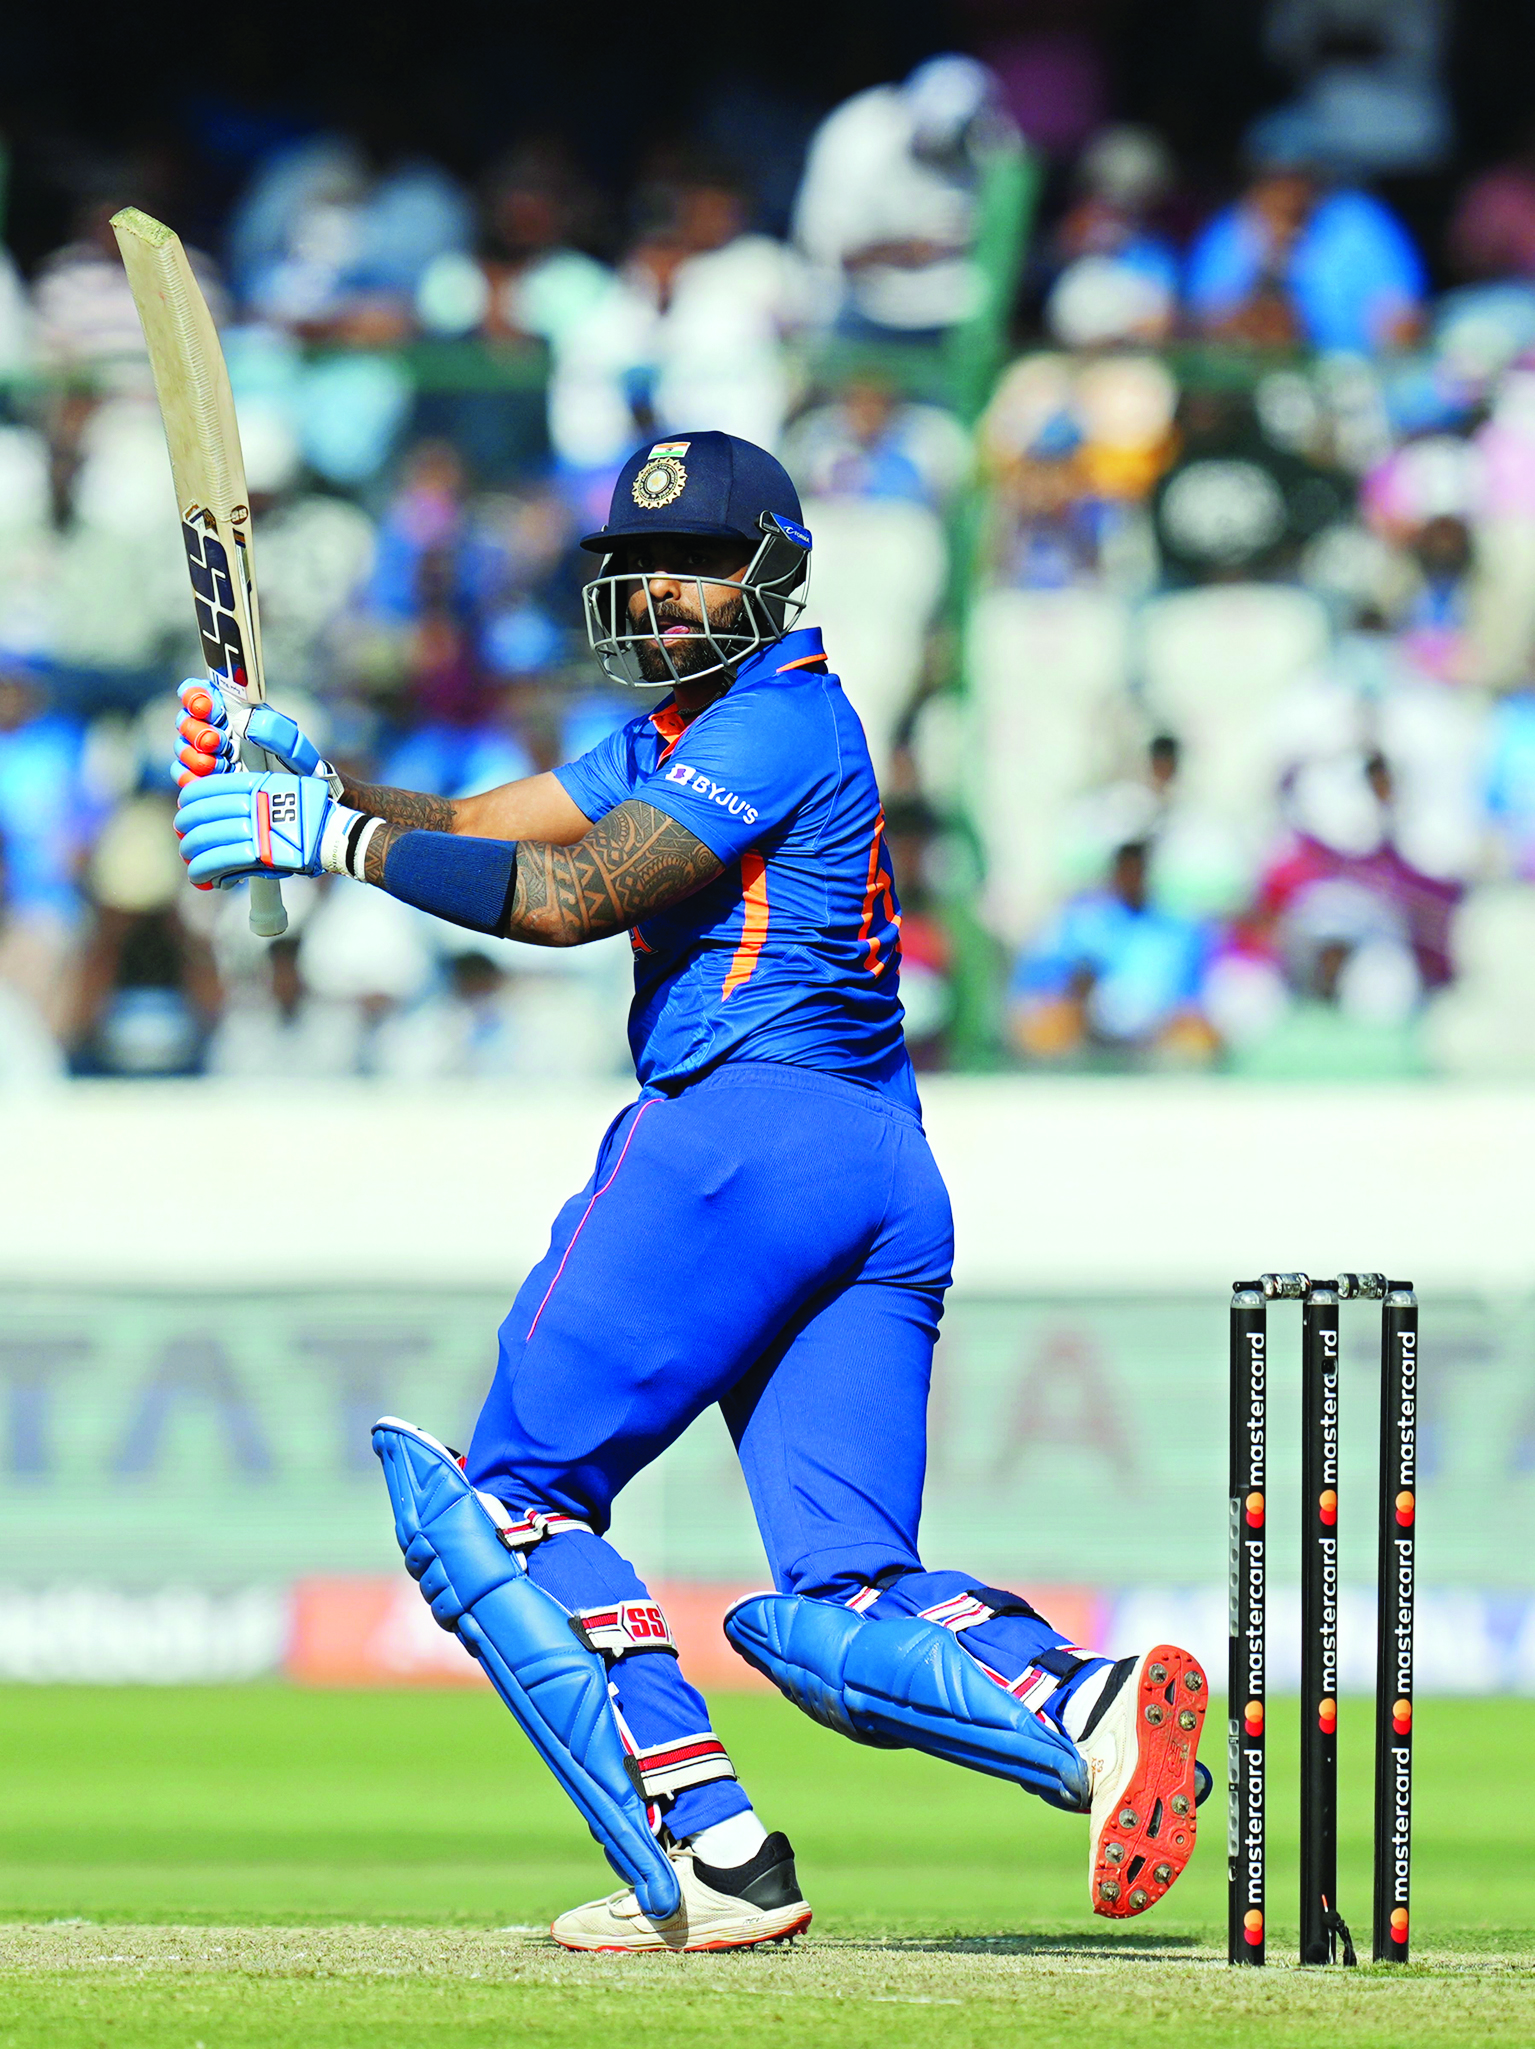 Surya voted ICC Men’s T20 Cricketer of Year